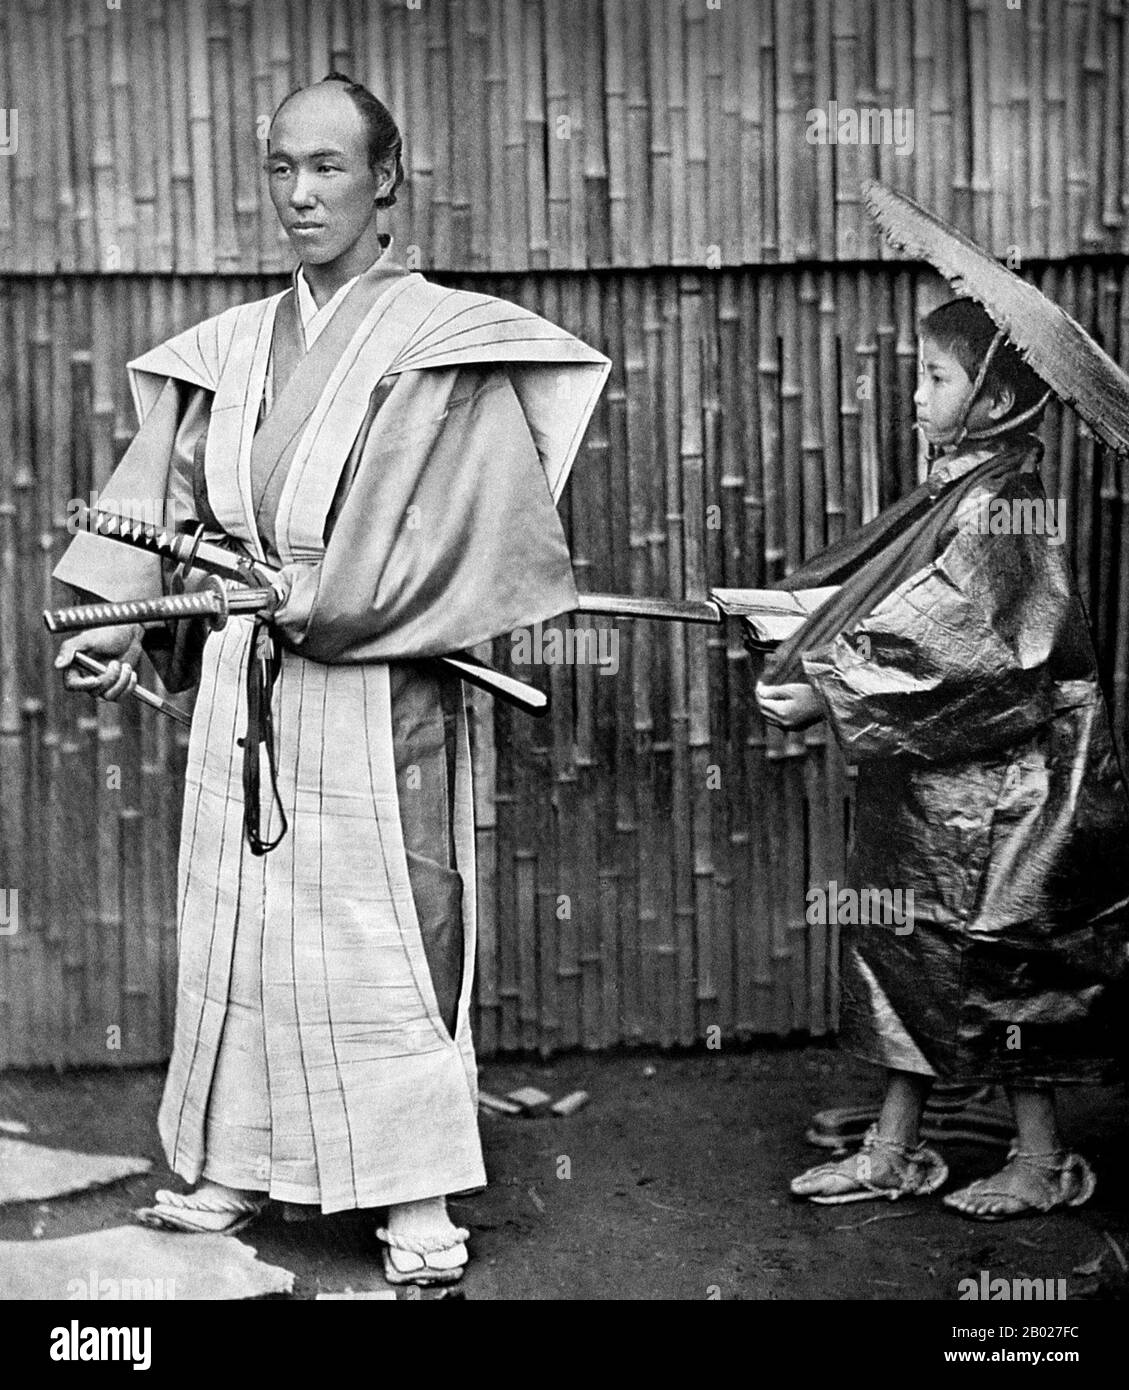 Samurai (侍), usually referred to in Japanese as bushi (武士) or buke (武家), were the military nobility of medieval and early-modern Japan.  By the end of the 12th century, samurai became almost entirely synonymous with bushi, and the word was closely associated with the middle and upper echelons of the warrior class. The samurai followed a set of rules that came to be known as bushidō.  While the samurai numbered less than 10% of Japan's population, their teachings can still be found today in both everyday life and in modern Japanese martial arts. Stock Photo